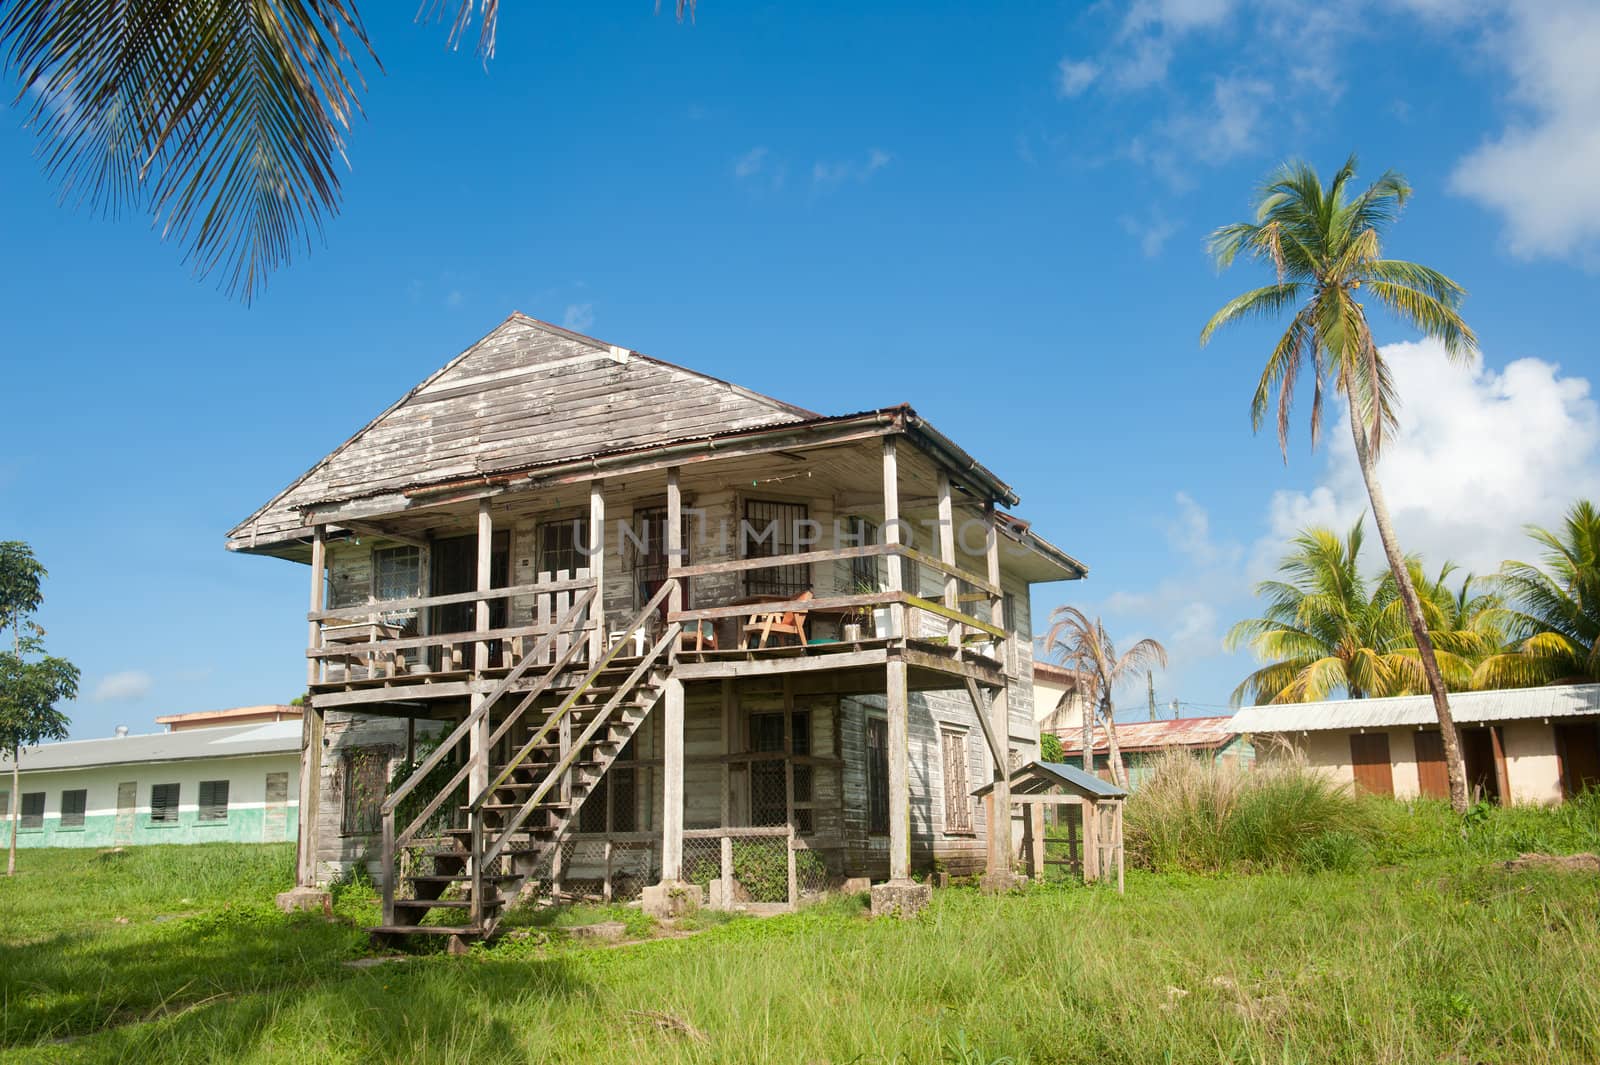 Old caribbean wooden house in Central America.